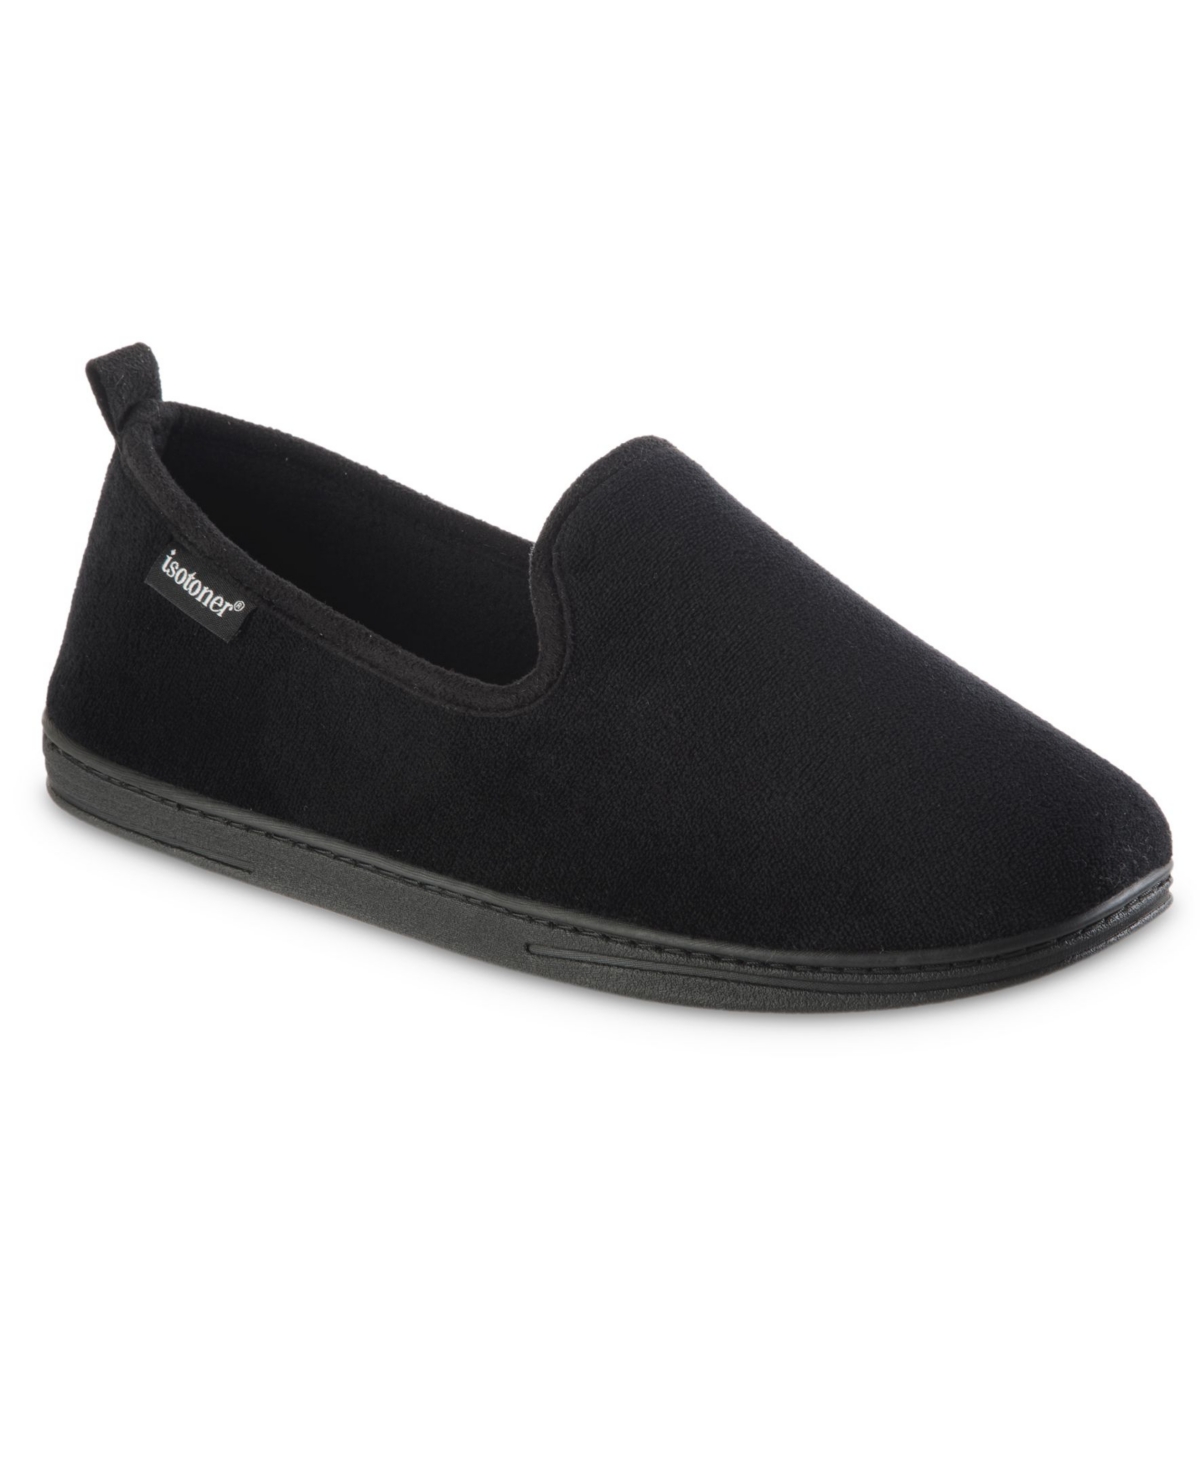 Men's Memory Foam Microterry Samson Closed Back Slippers - Navy